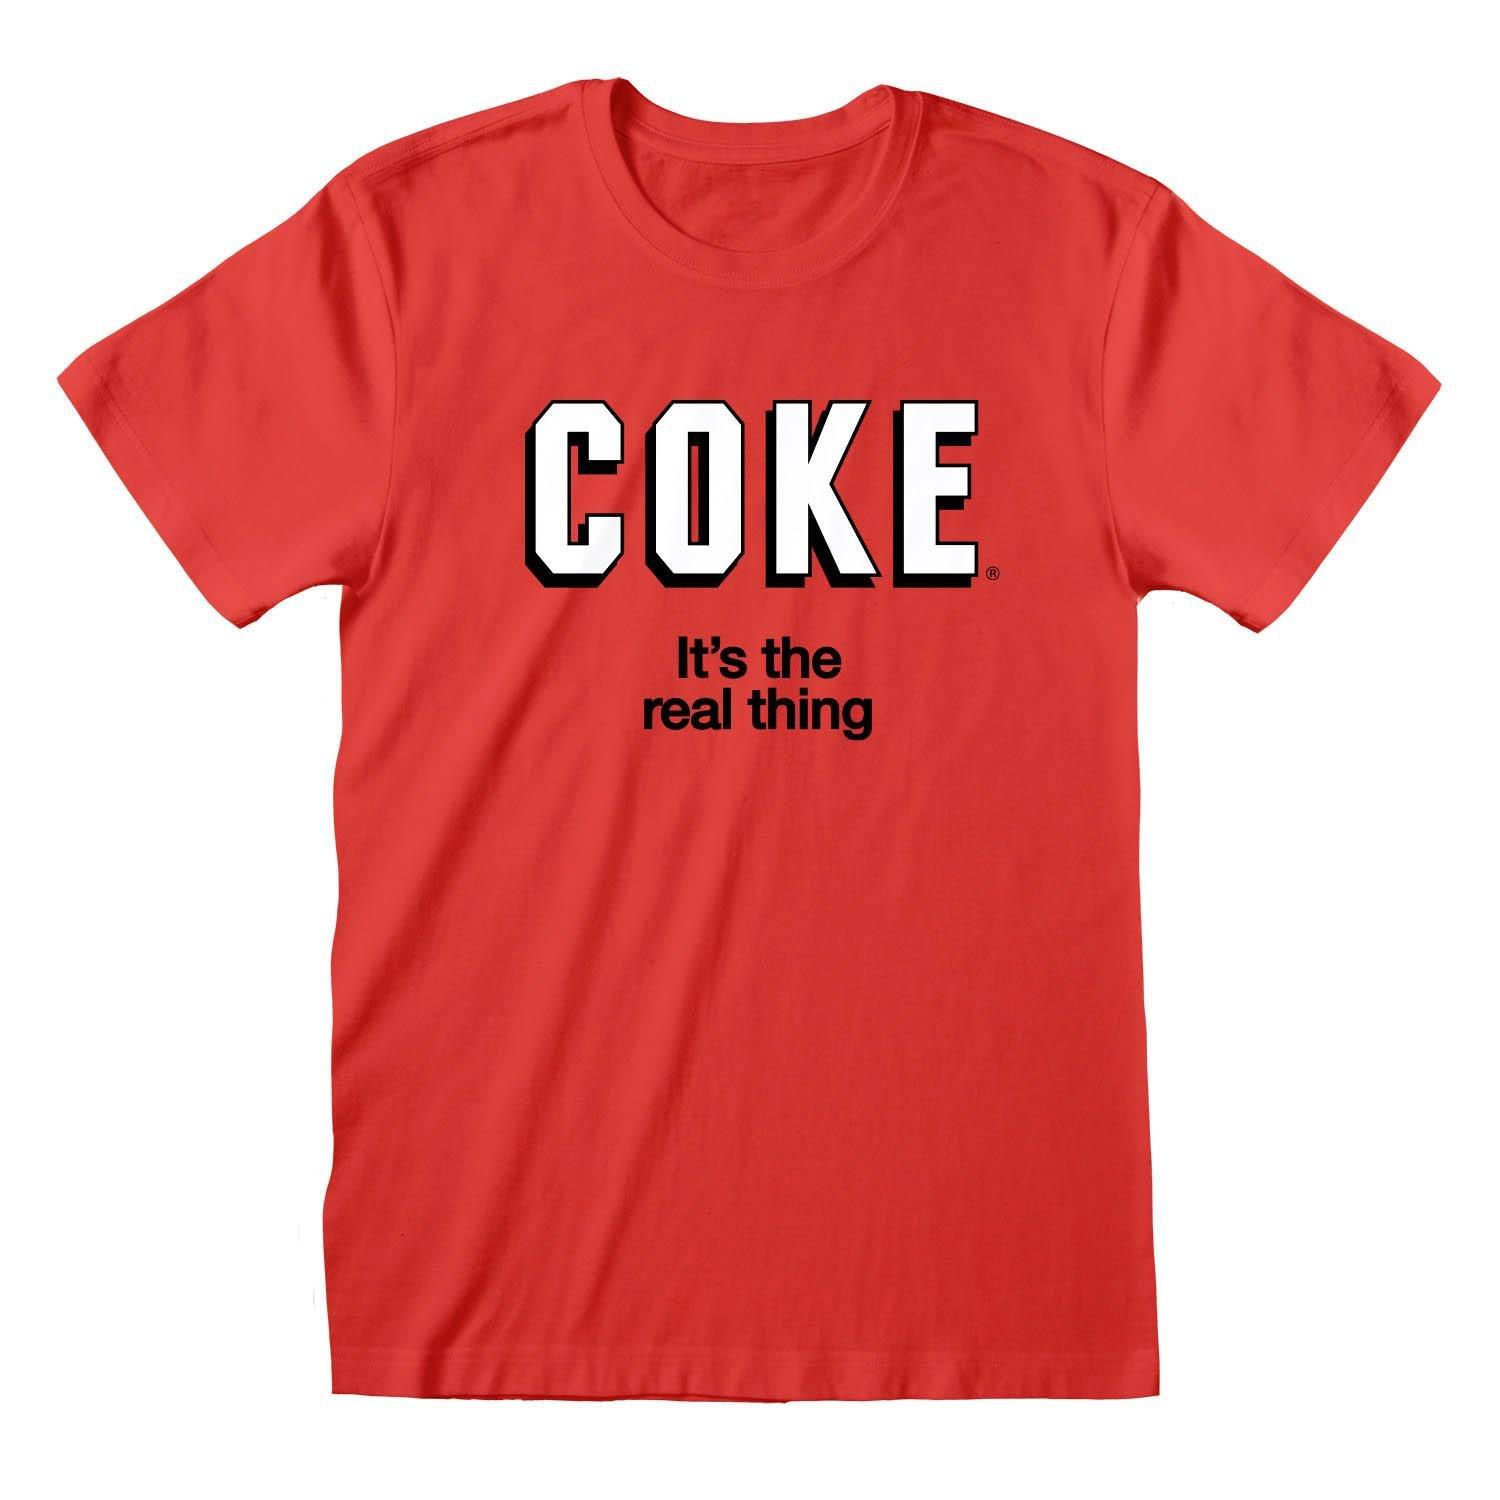 Image of Coca-Cola It's The Real Thing TShirt - S